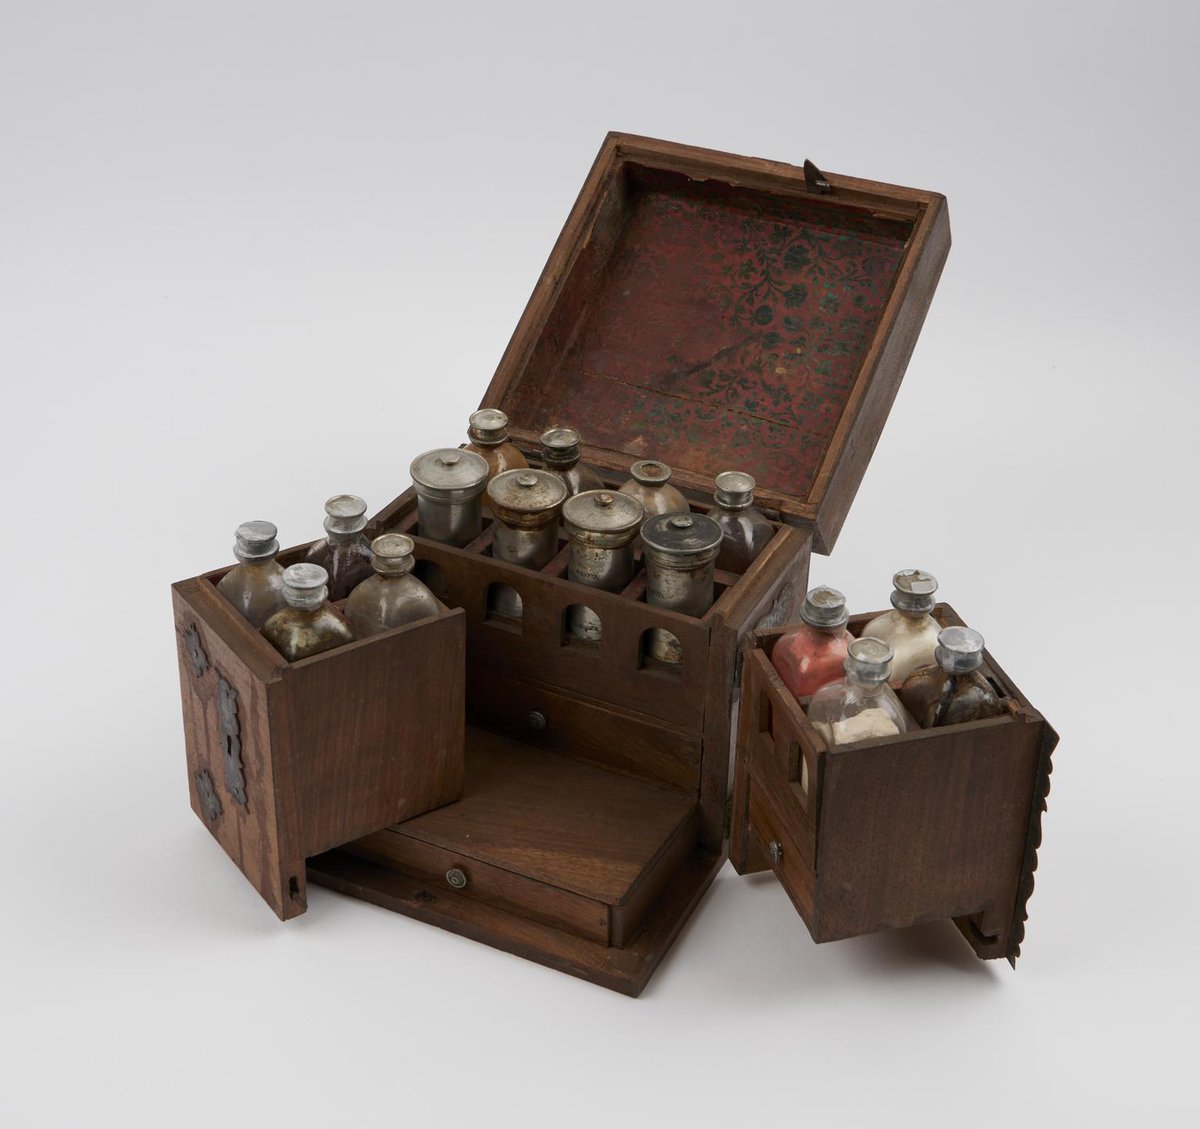 Wooden medicine chest, hinged lid, swing back fronts, iron fittings, compartments for drug bottles (12) and pewter canisters (4), drawers below for scales, weights, mortar and pestle etc., German, 1731-1850. Science Museum.